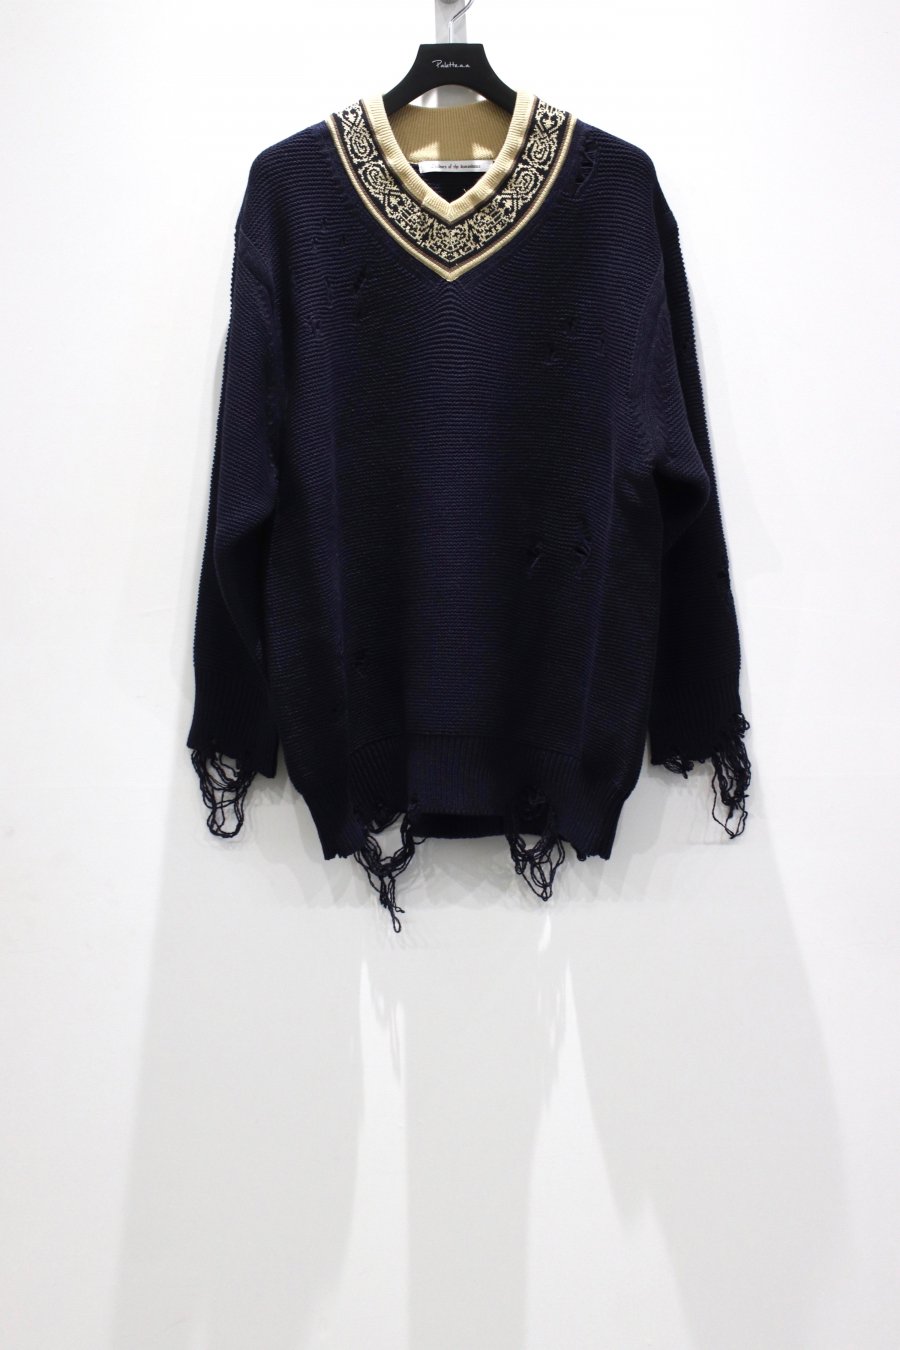 Children of the discordance  5G OVERSIZED DAMAGE VNECK KNIT(NAVY)<img class='new_mark_img2' src='https://img.shop-pro.jp/img/new/icons15.gif' style='border:none;display:inline;margin:0px;padding:0px;width:auto;' />